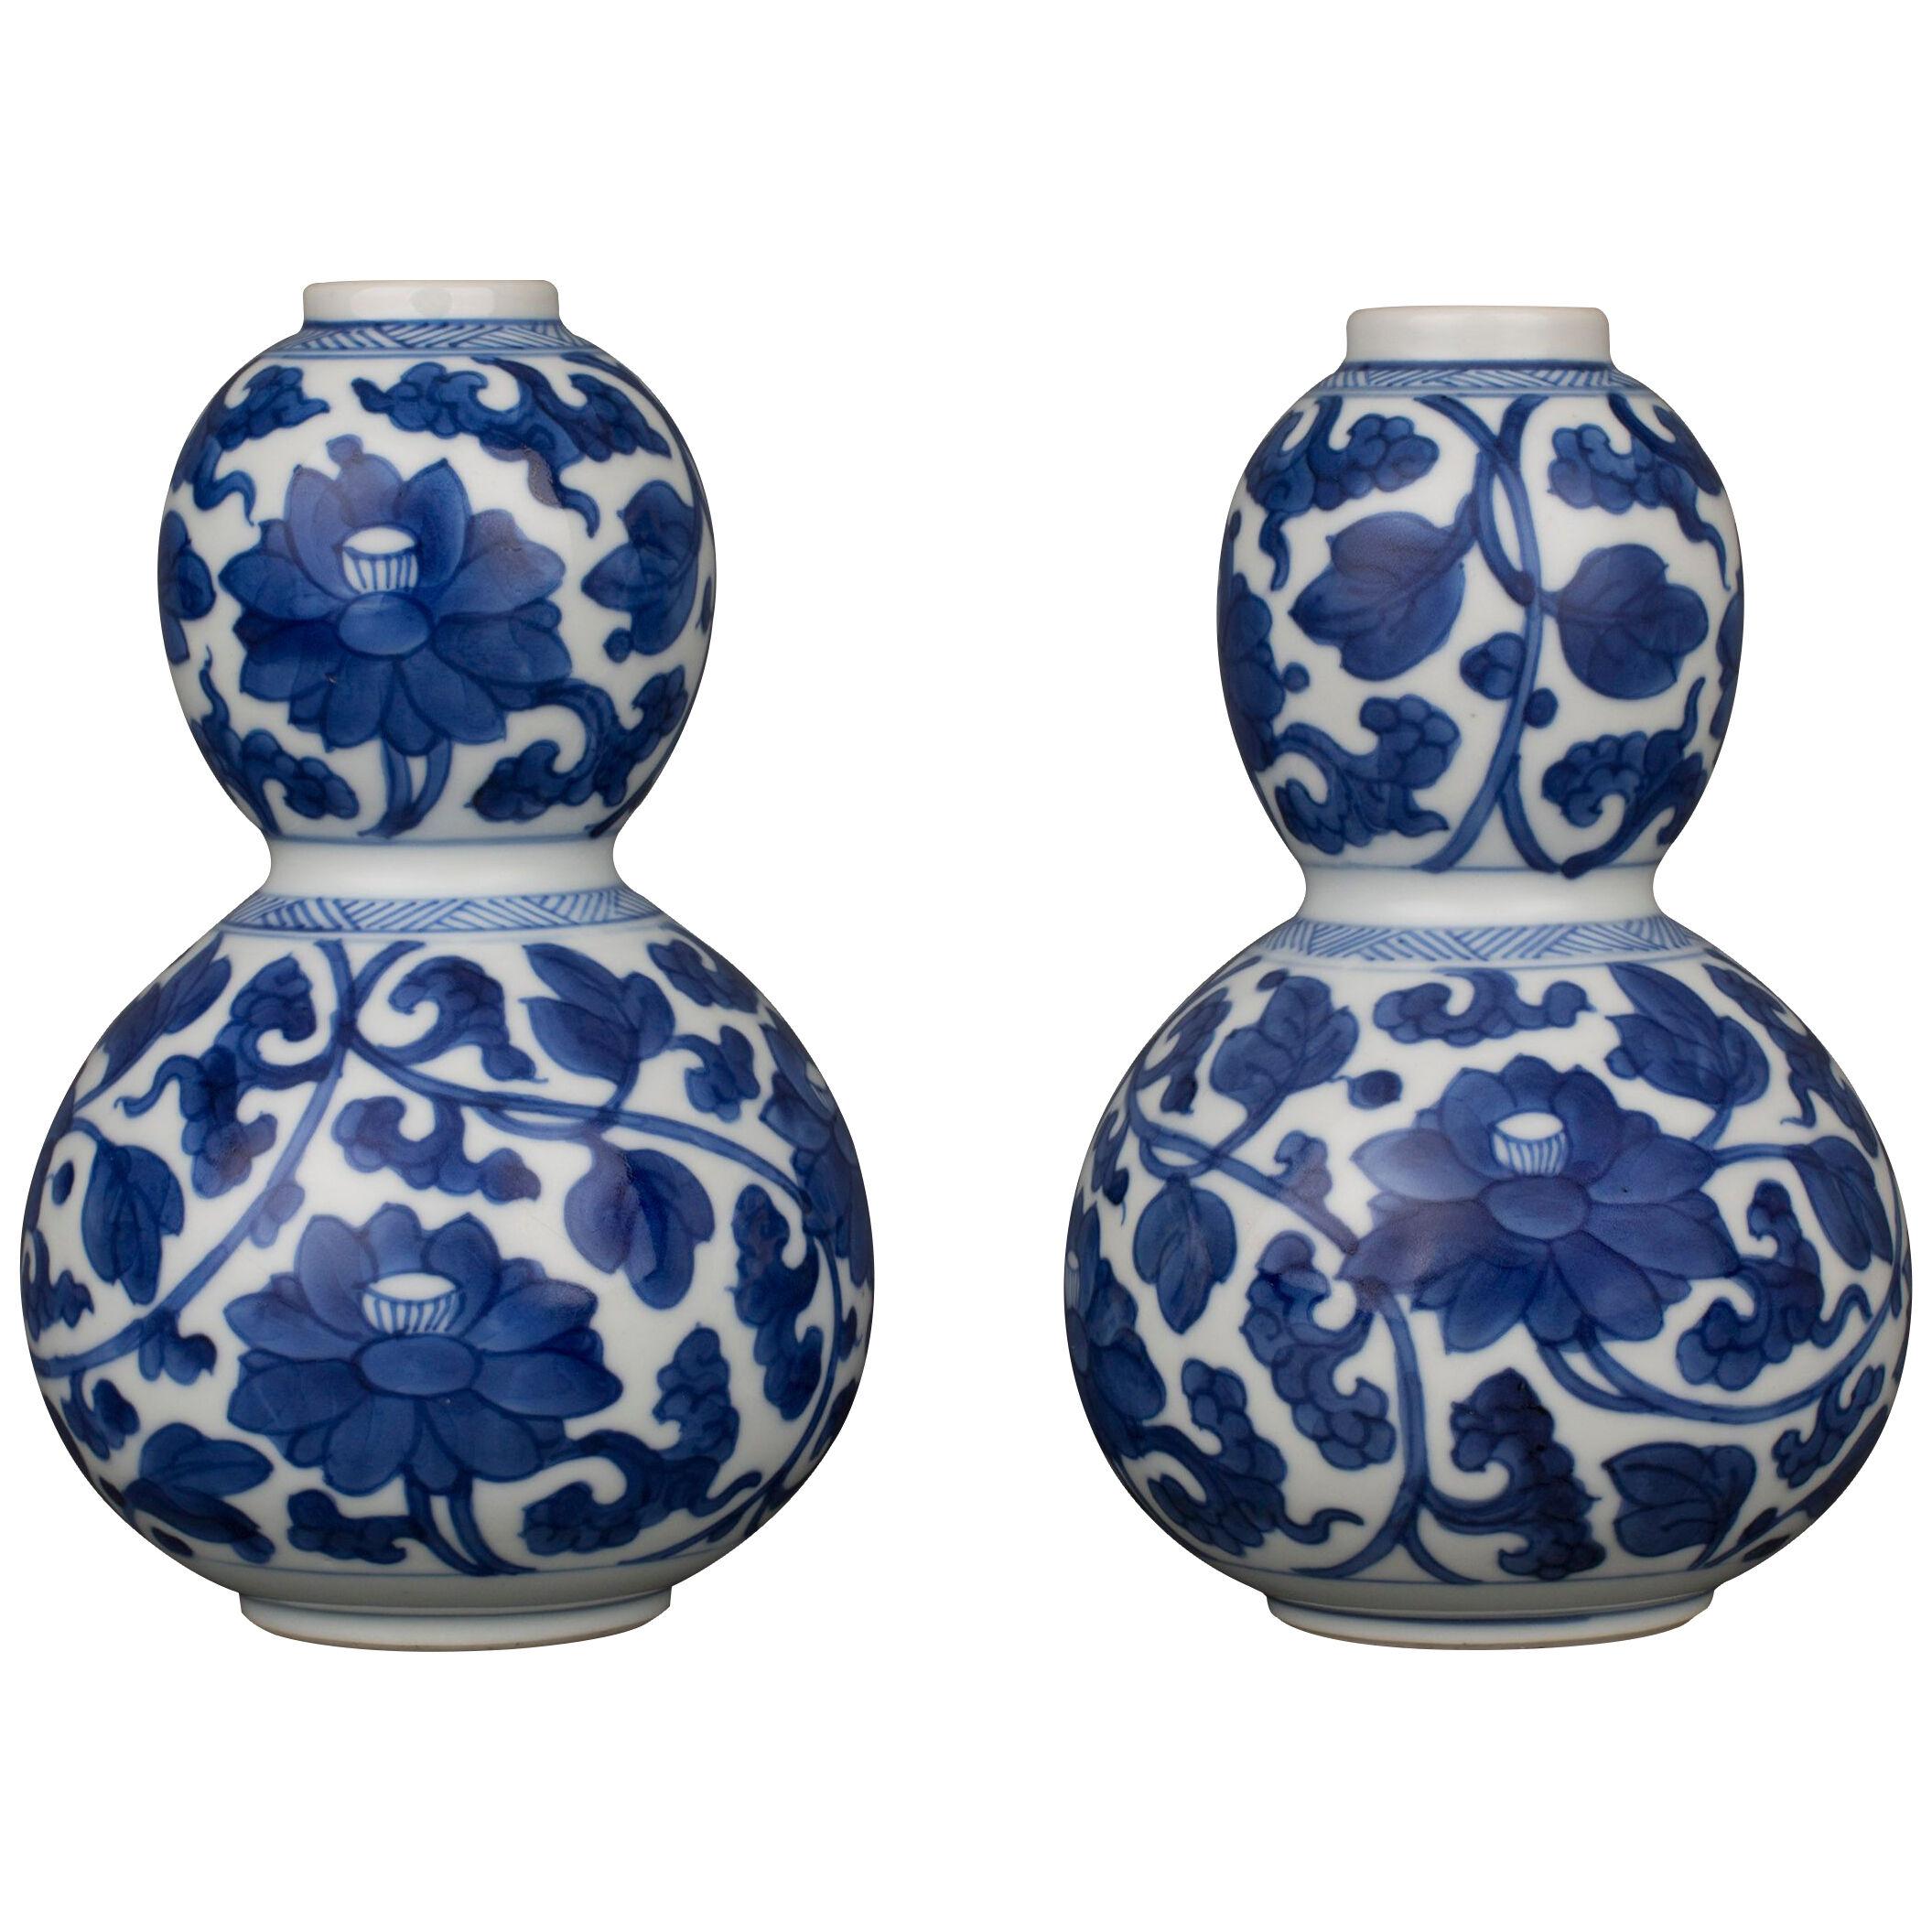 A pair of Chinese porcelain blue and white vases of double gourd form